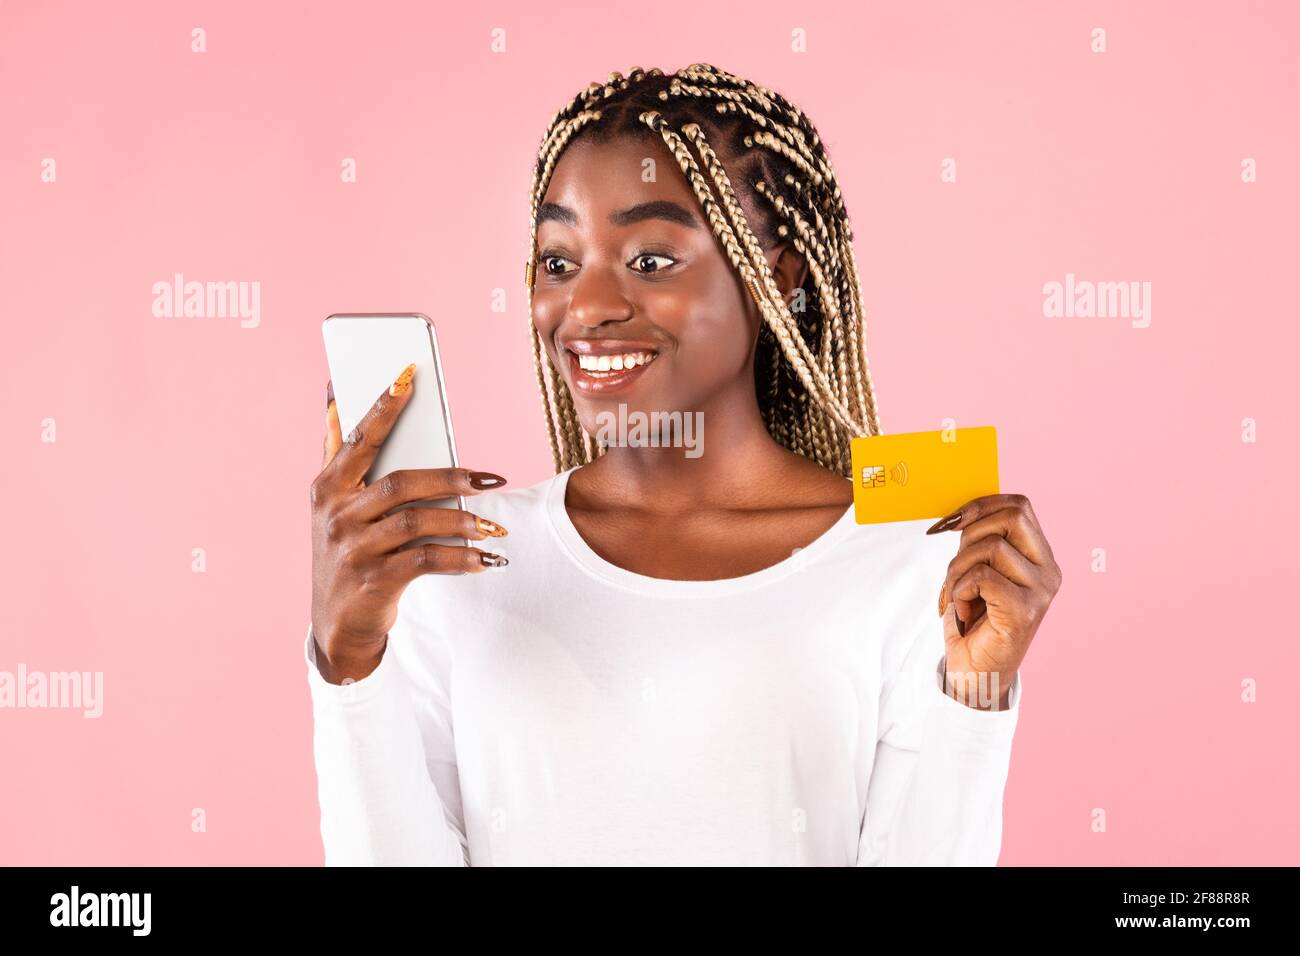 Excited black woman holding credit card and smartphone Stock Photo